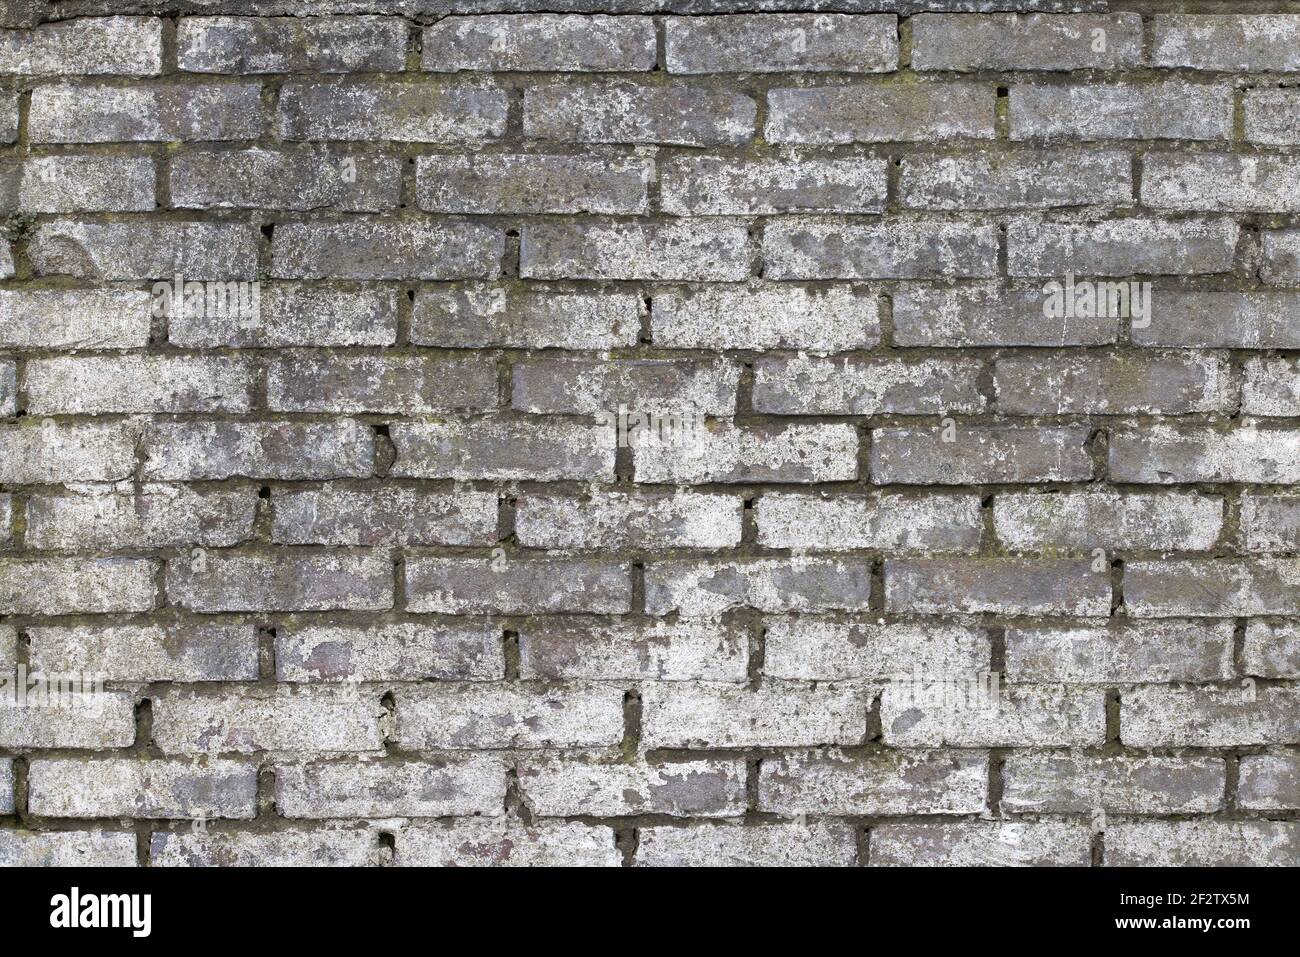 Background weathered brick wall with white plastering Stock Photo